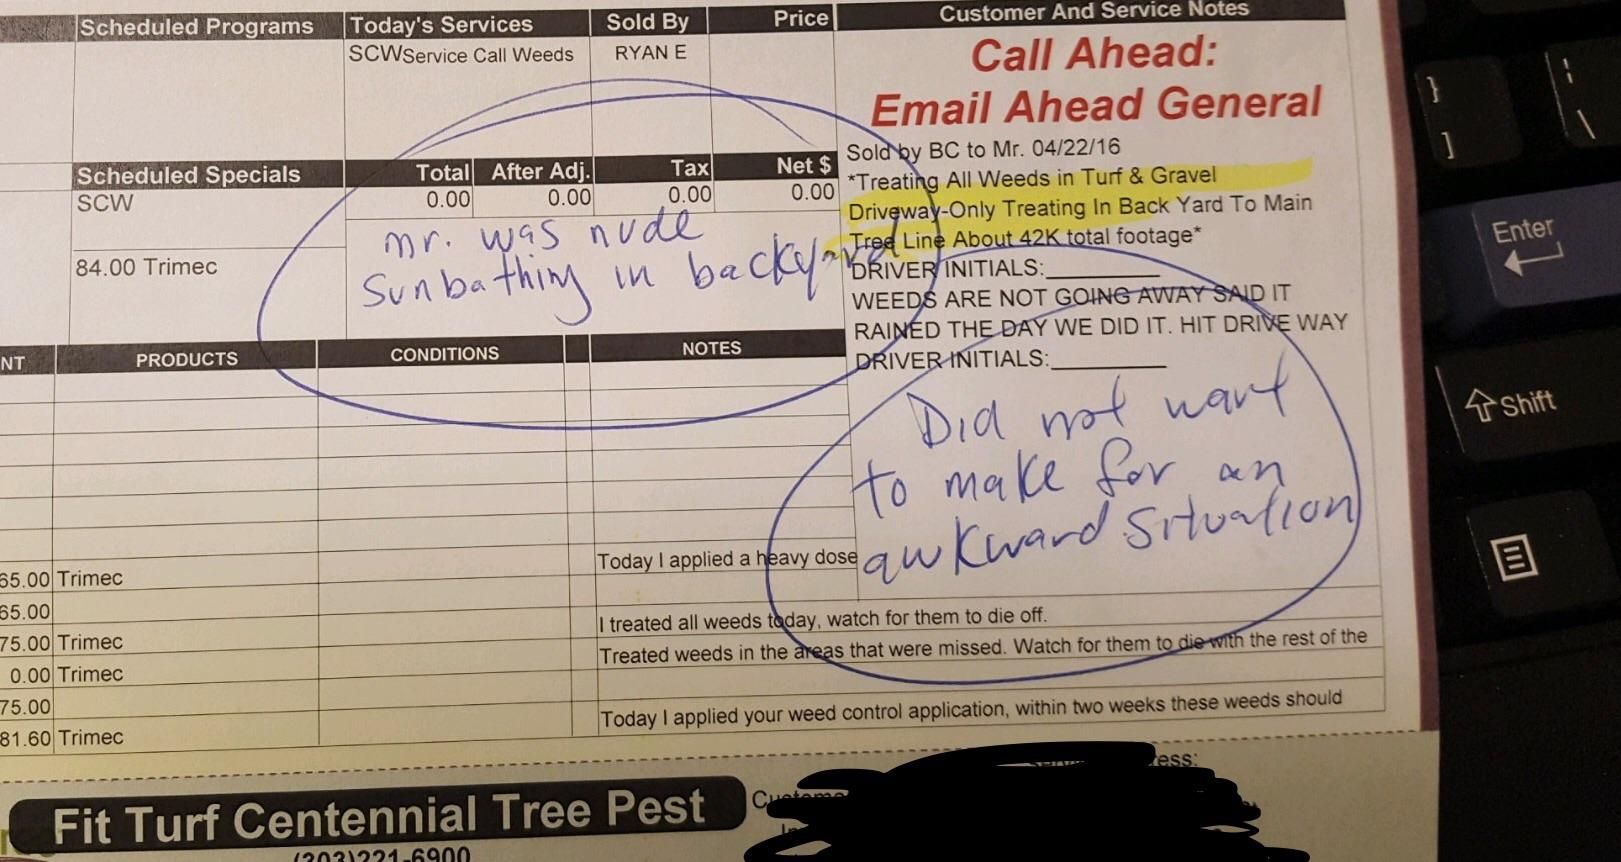 My friend works for a lawn care company. She sent me this "reason why the technician would not complete the appointment"